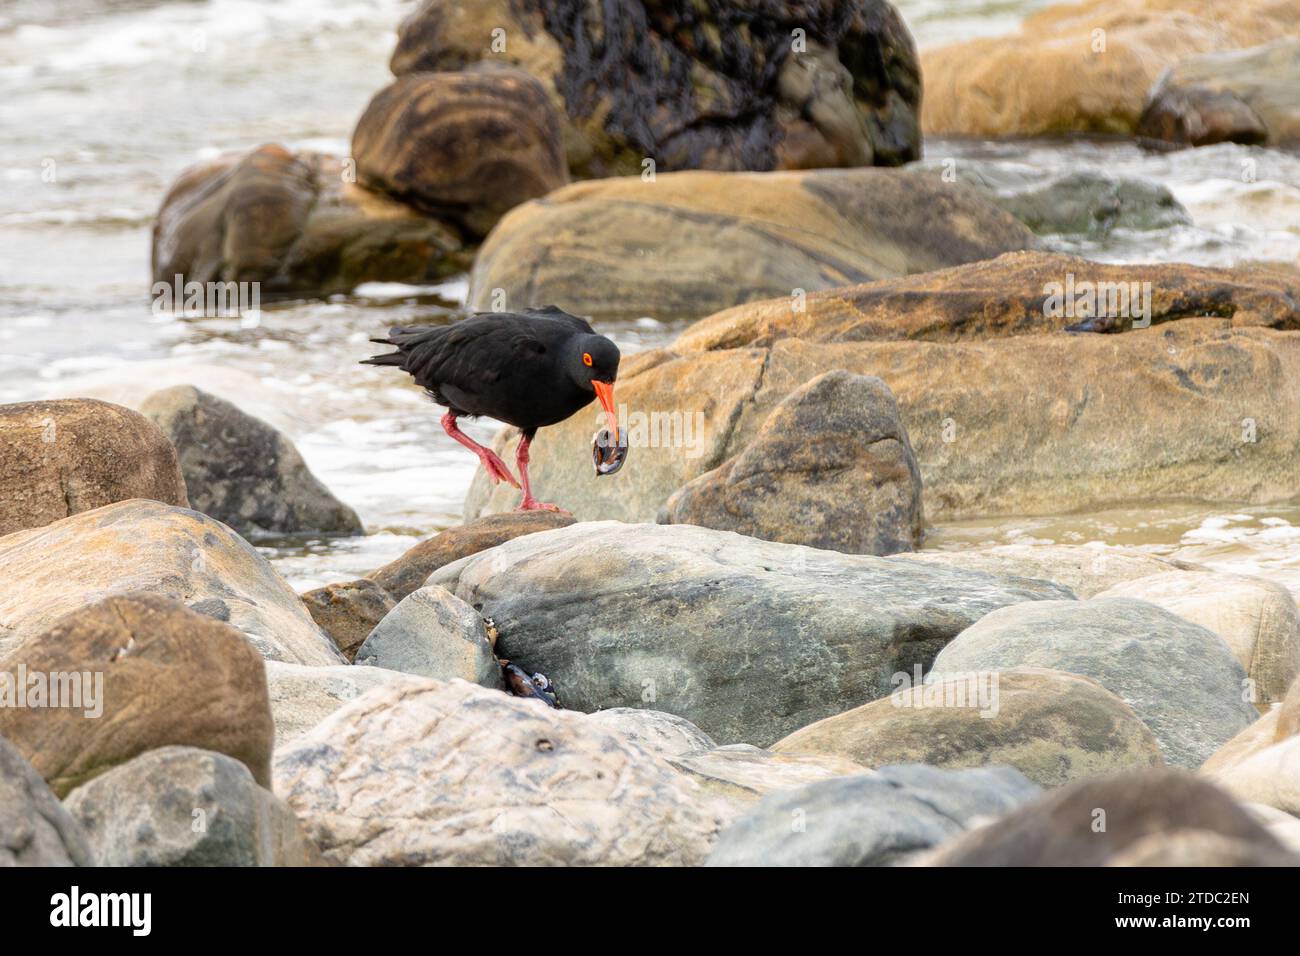 African oystercatcher (Haematopus moquini) or African black oystercatcher on the rocks of Noordhoek beach on the Cape peninsula, South Africa. Stock Photo